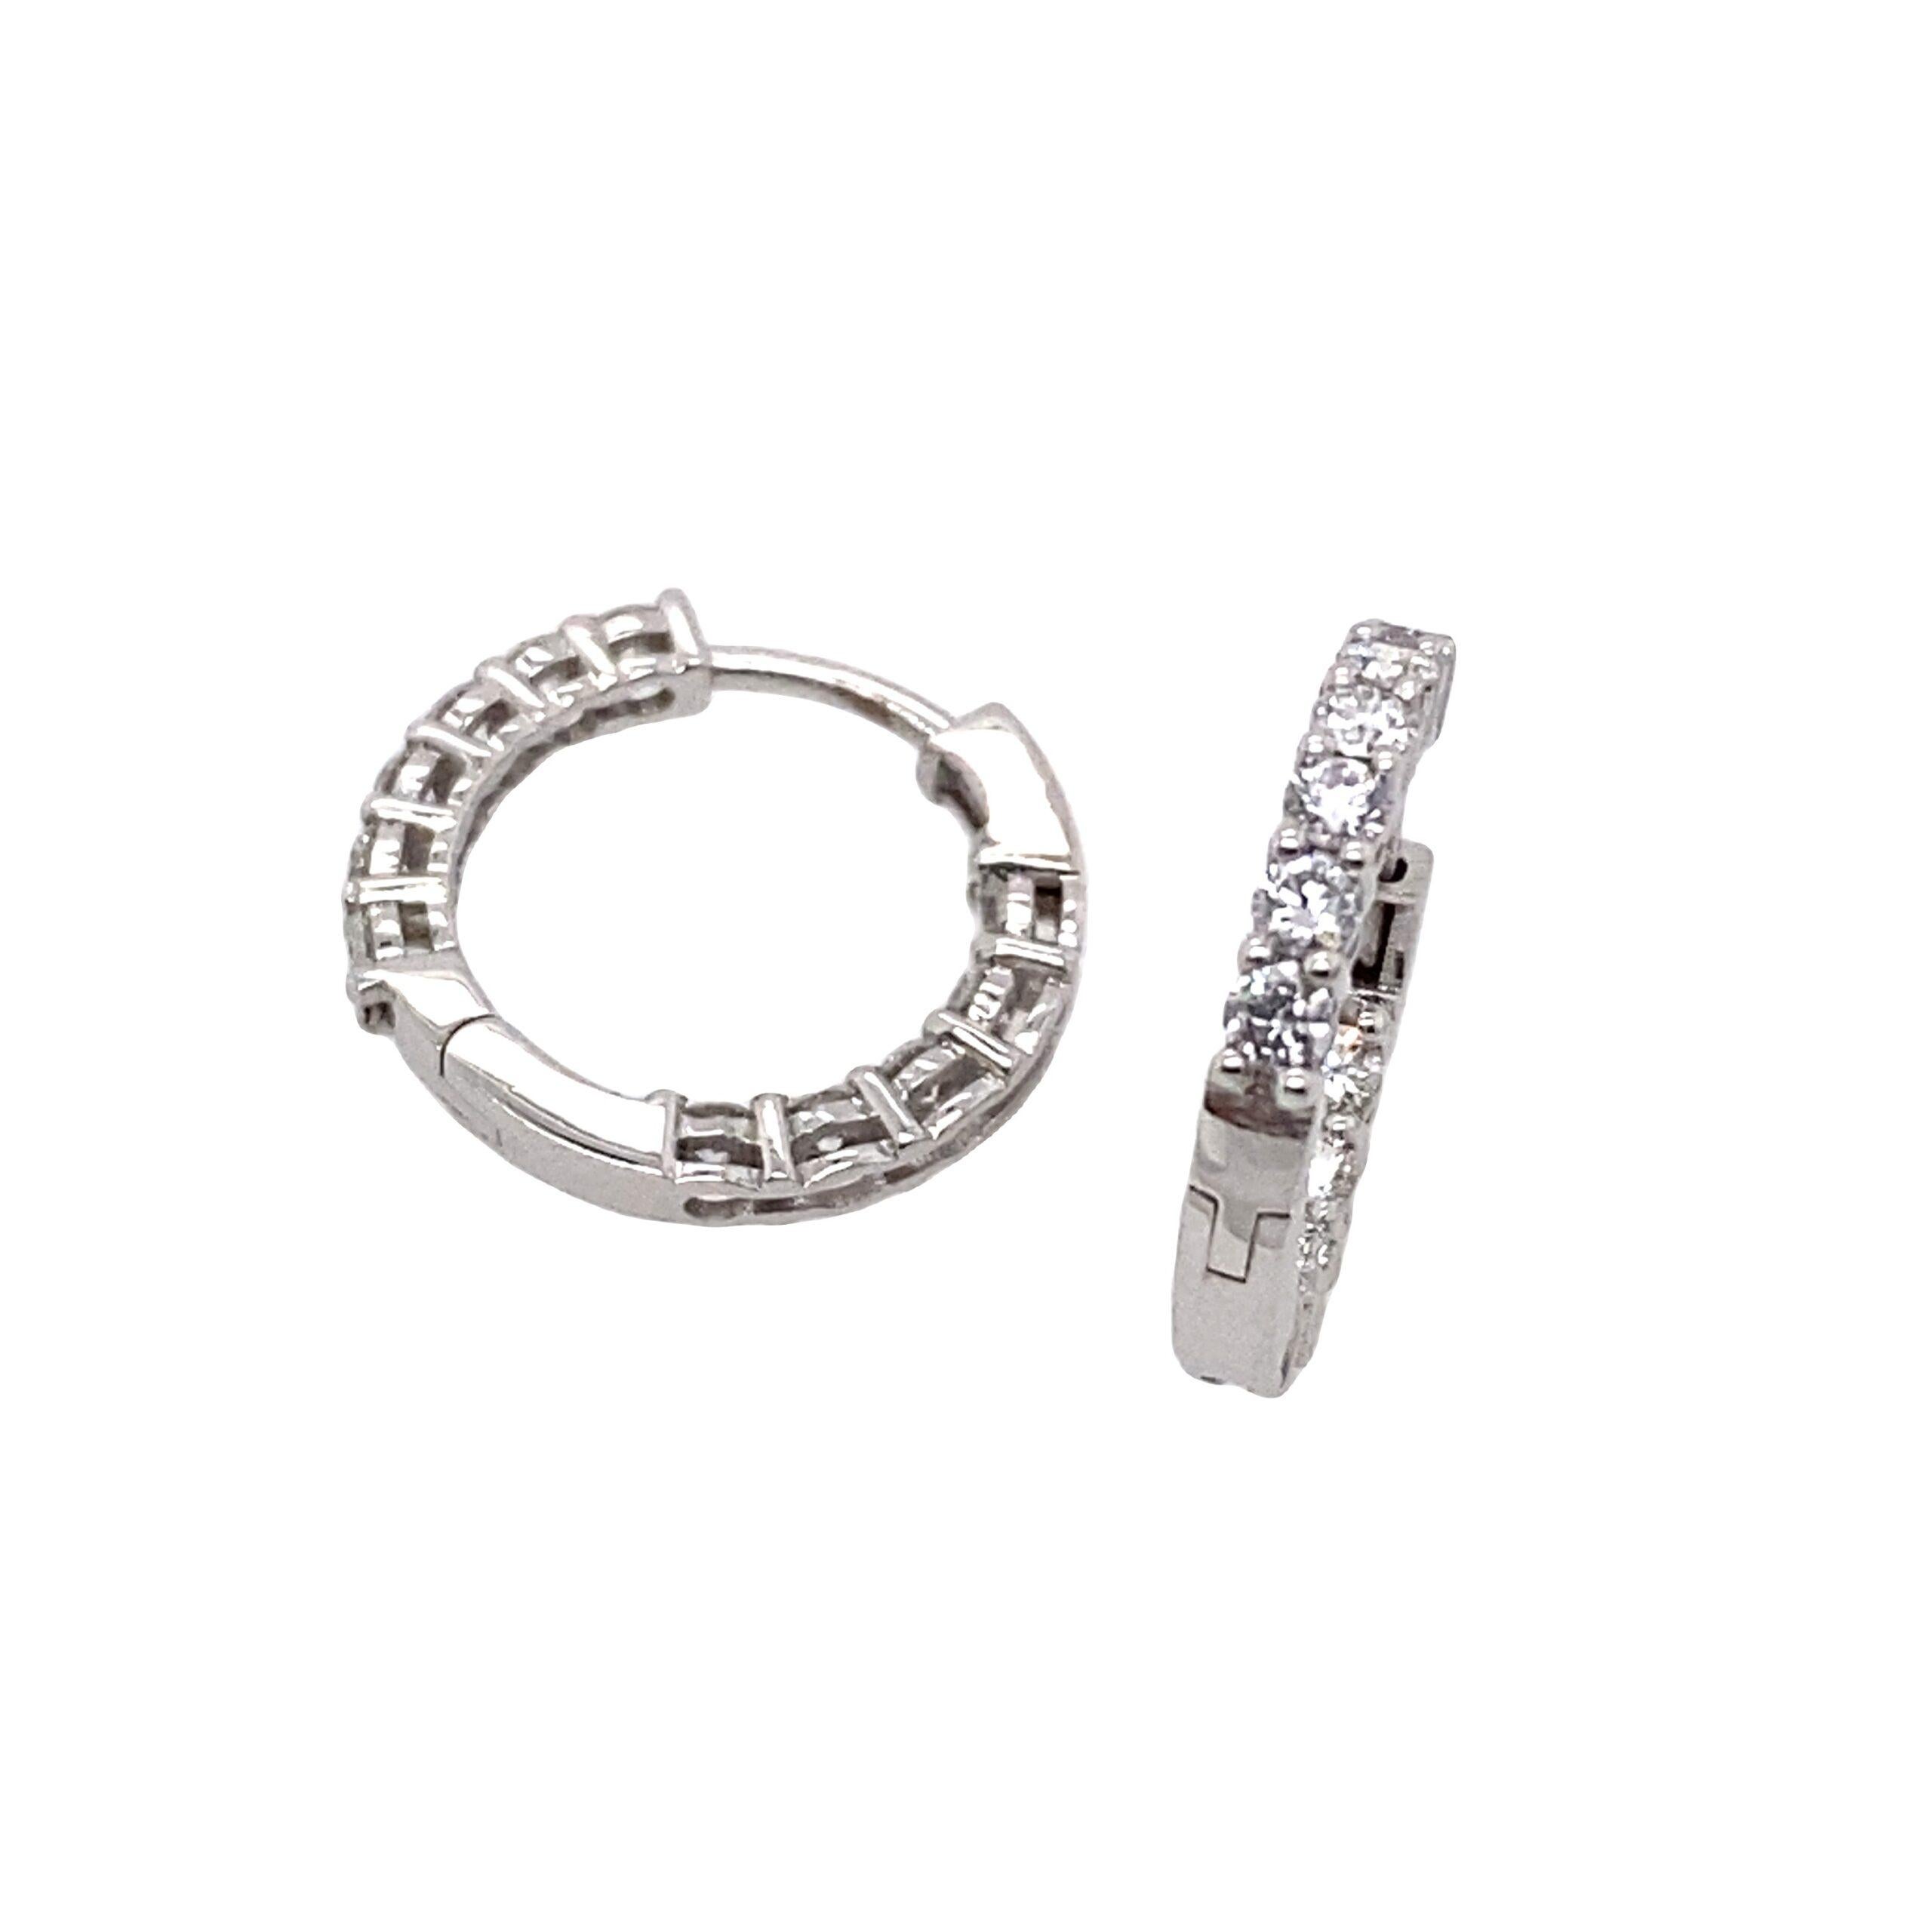 18ct White Gold Diamond Hoop Earrings, Set With 11 Diamonds In Each Earring

Additional Information: 
Total Diamond Weight :0.66ct
Diamond Colour: G/H
Diamond Clarity: SI
Total Weight: 2.8g
External Diameter: 15.30mm
Internal Diameter: